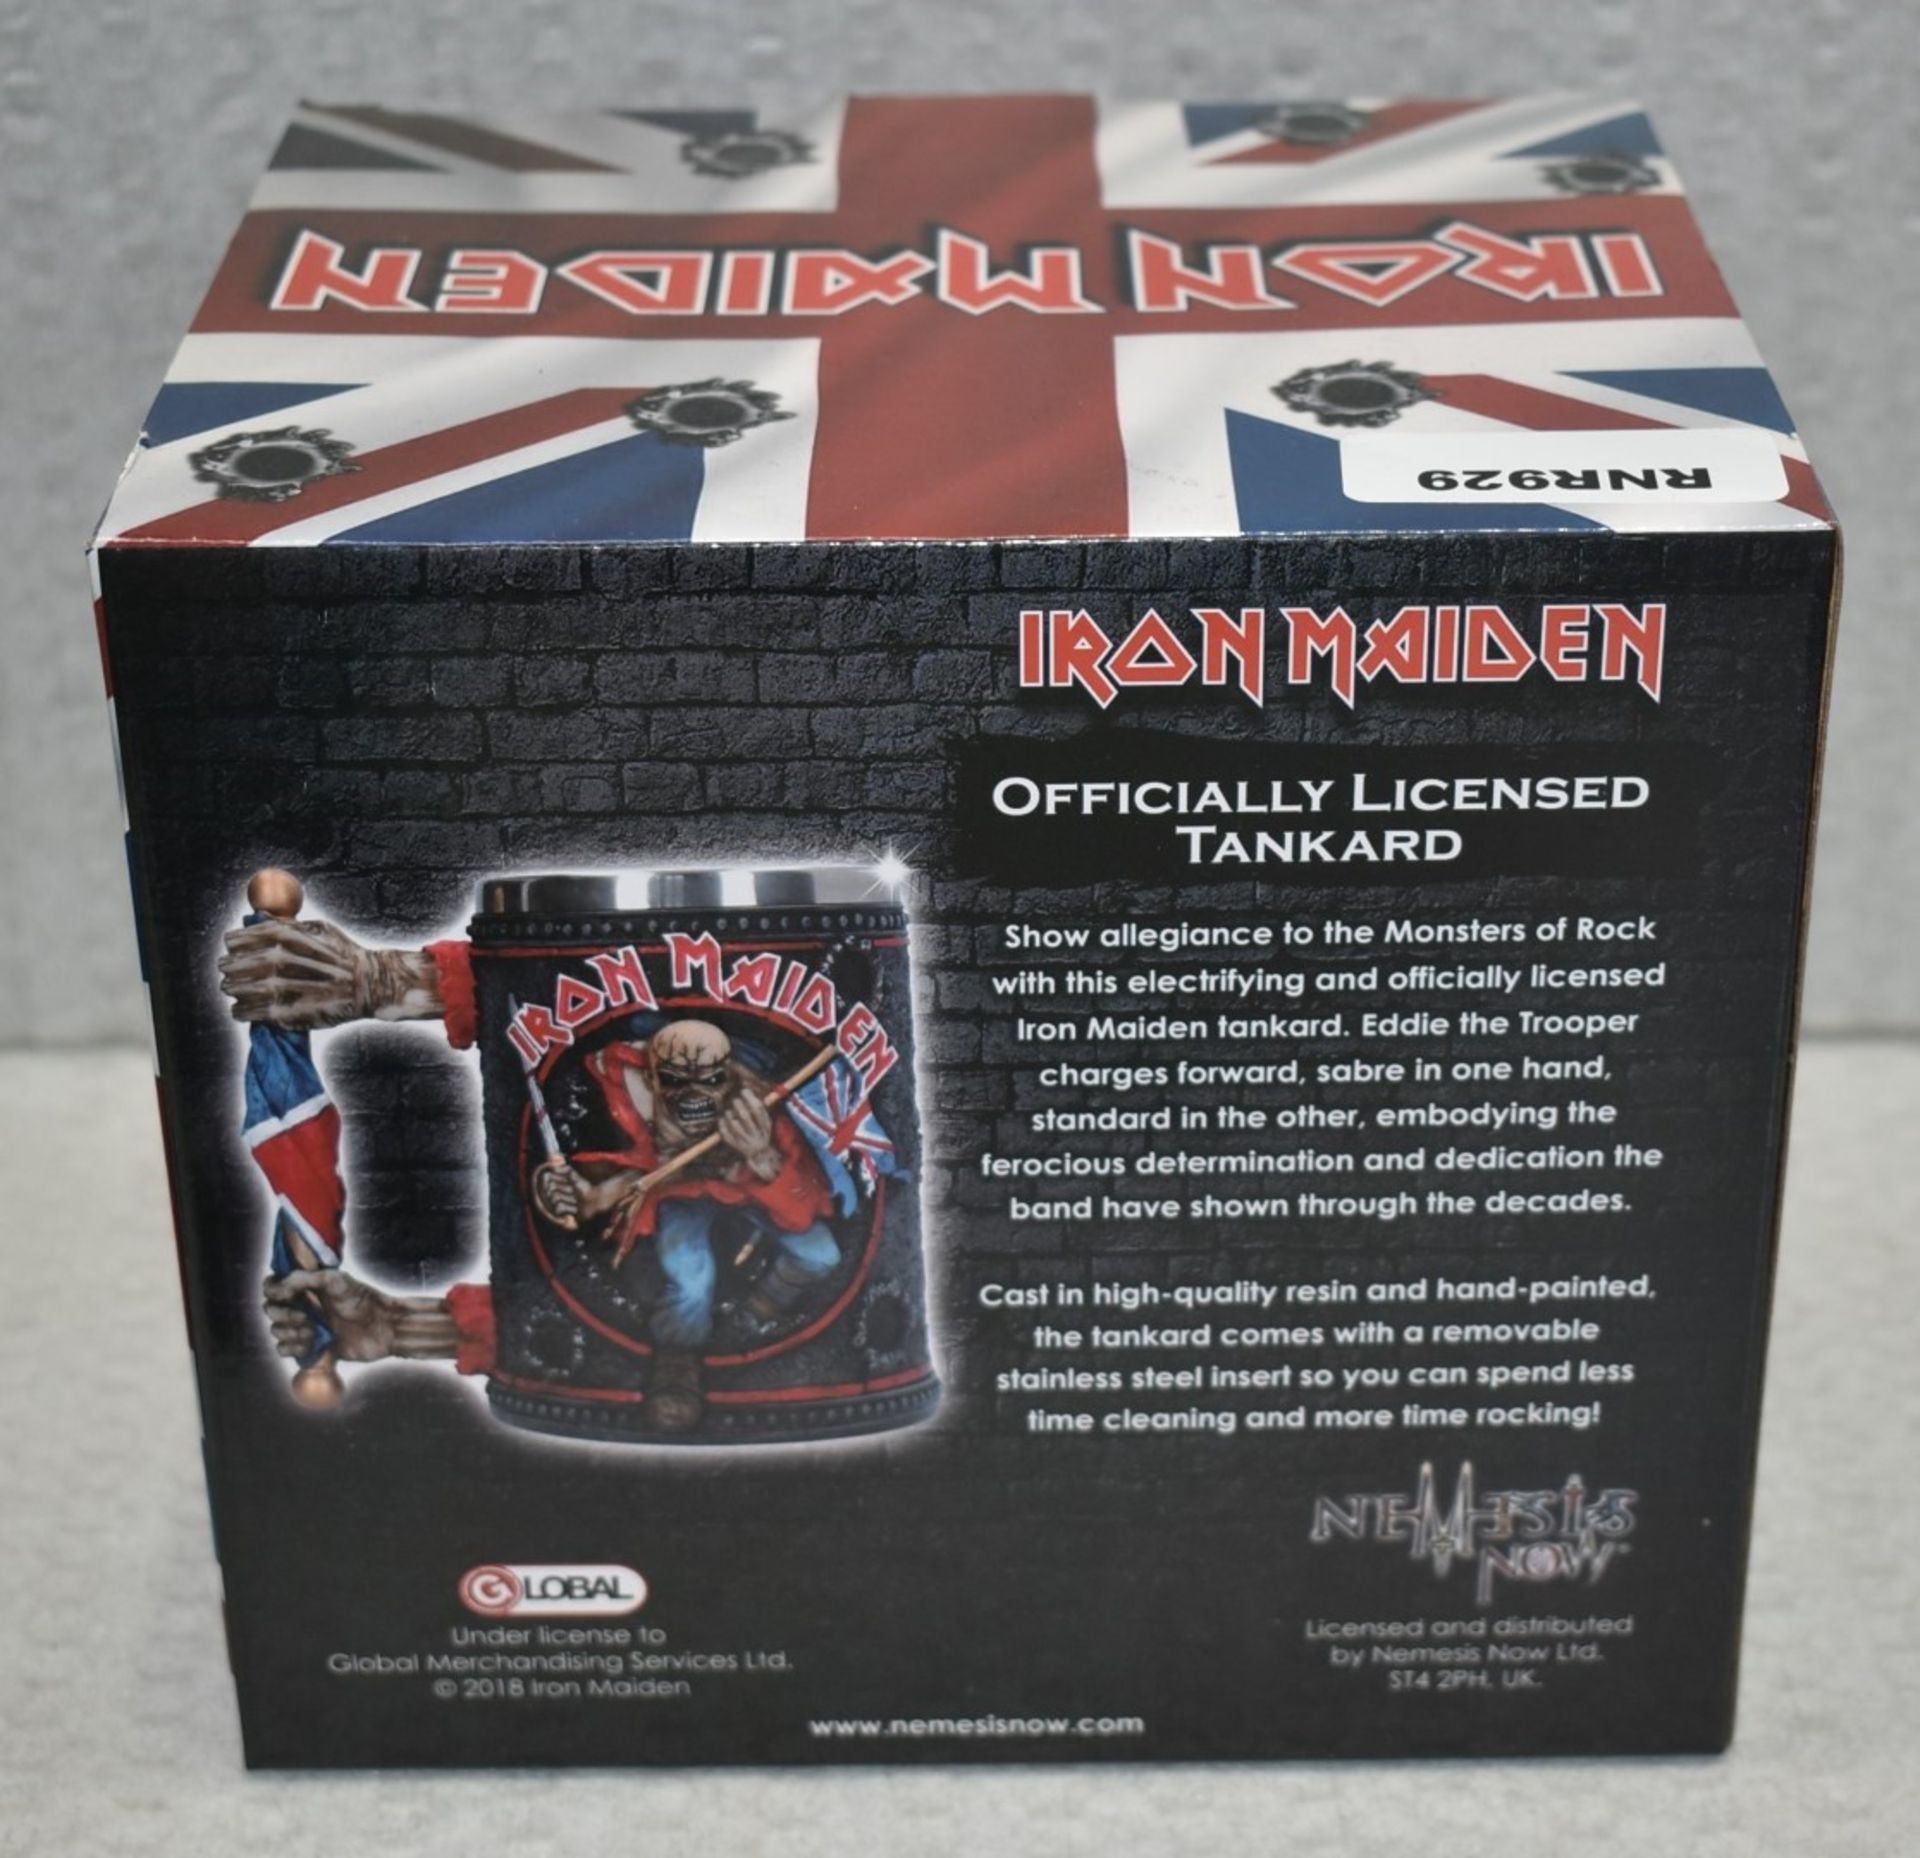 1 x Iron Maiden Officially Licensed Tankard Featuring Eddie the Trooper and Union Jack - RRP £60 - Image 3 of 11